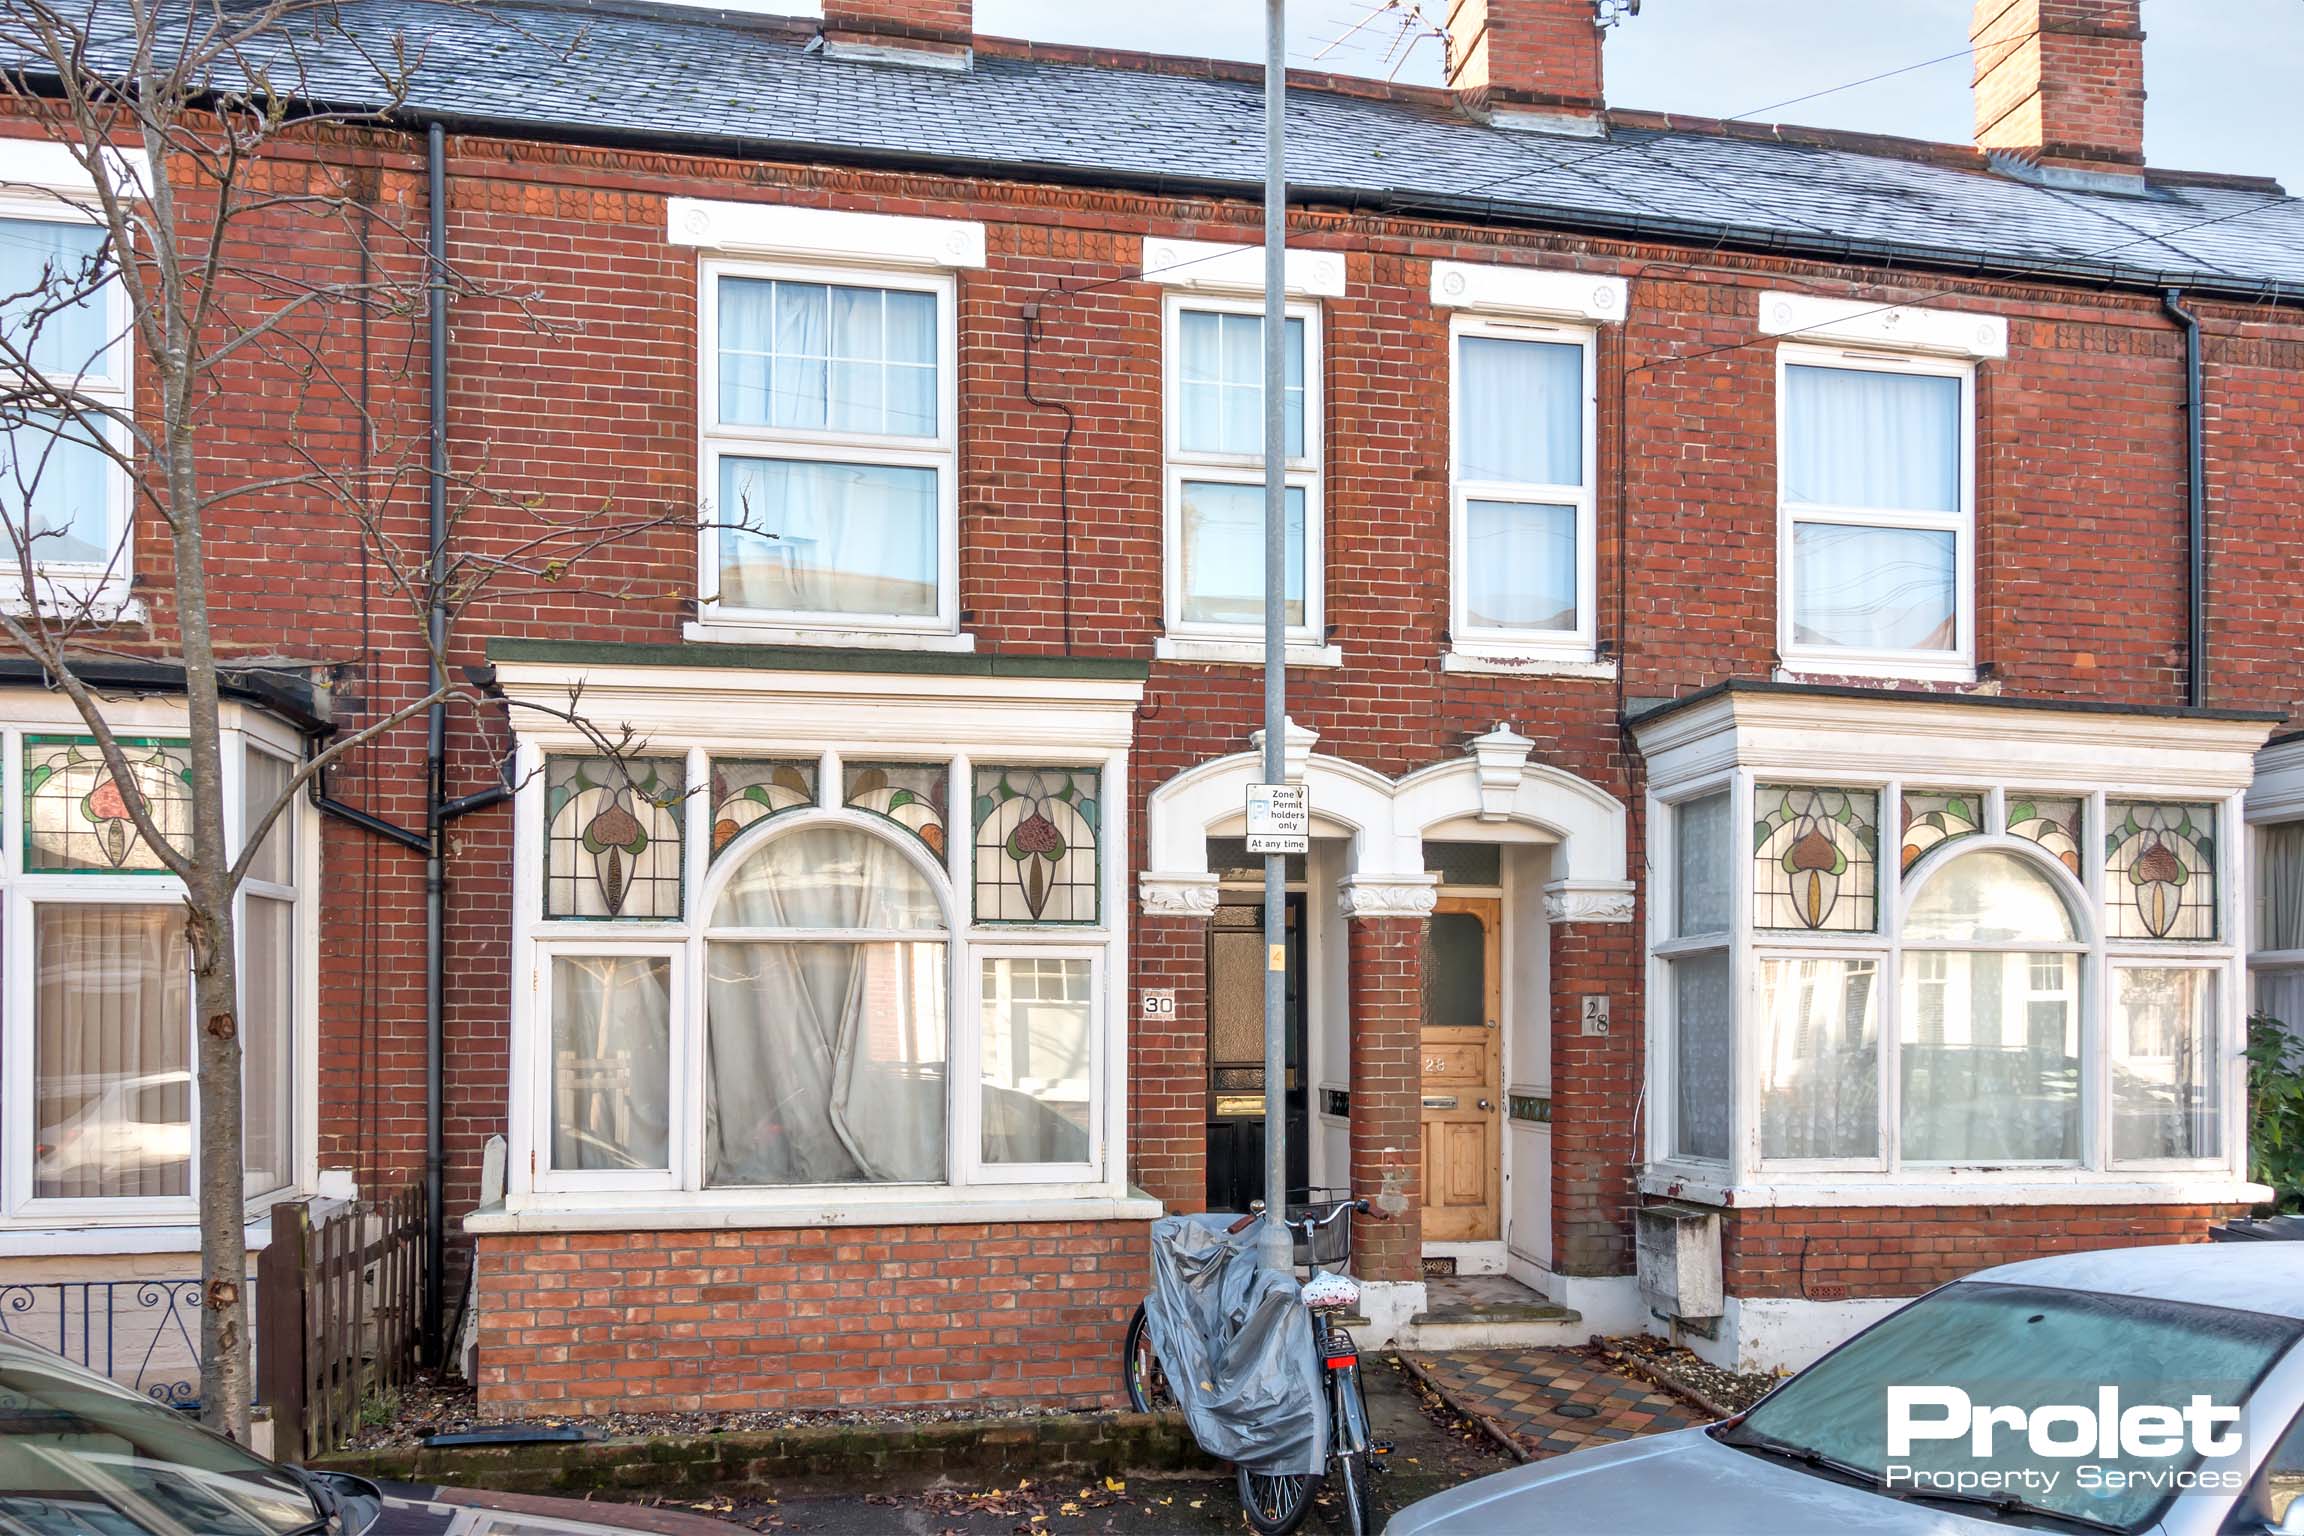 Booking a viewing for Kingsley Road, Norwich NR1 3RB